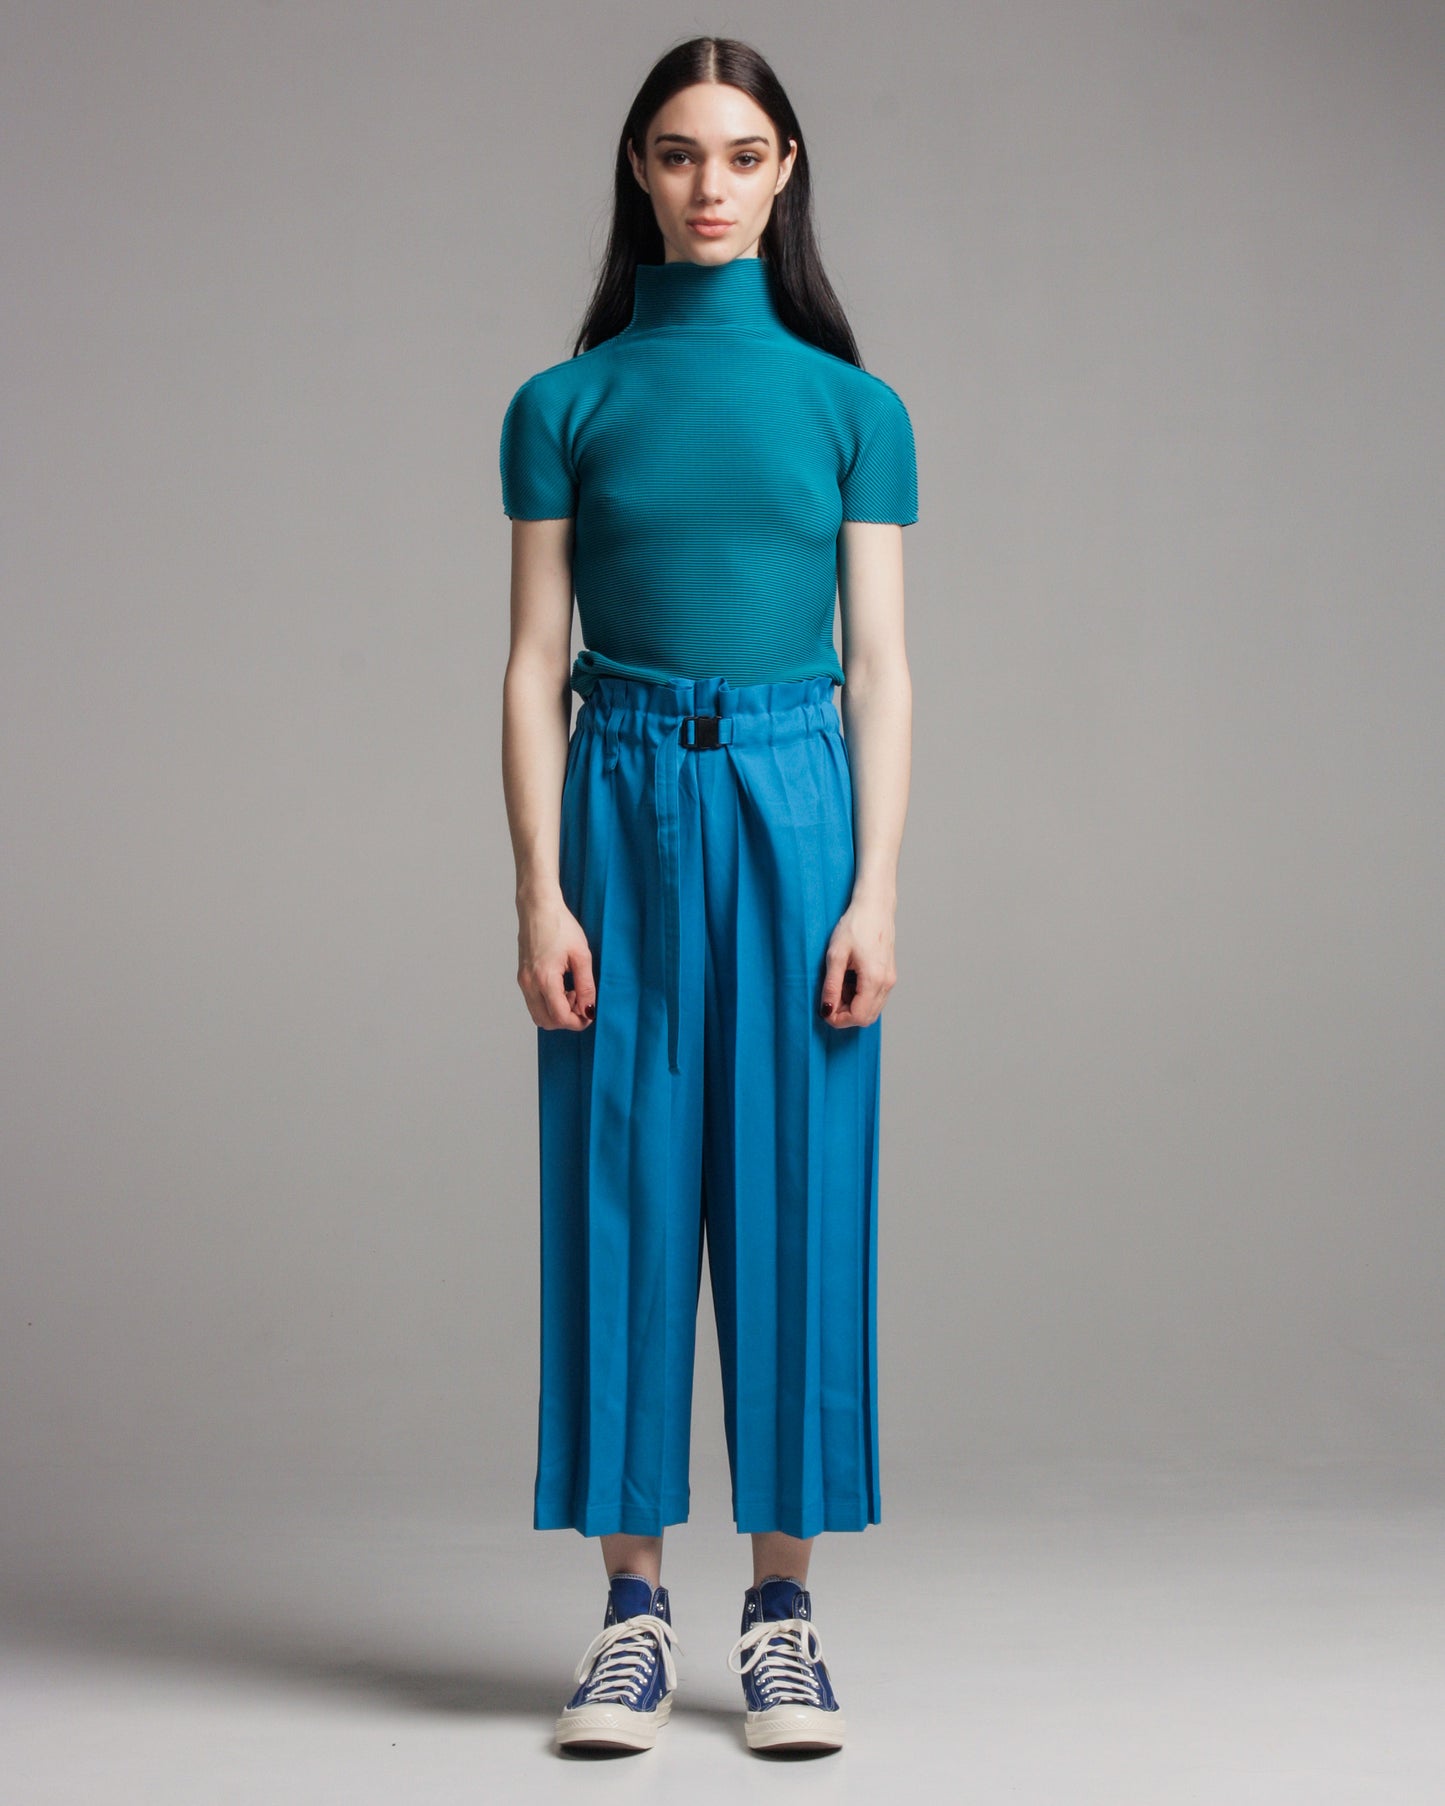 Turquoise Micropleat Tee